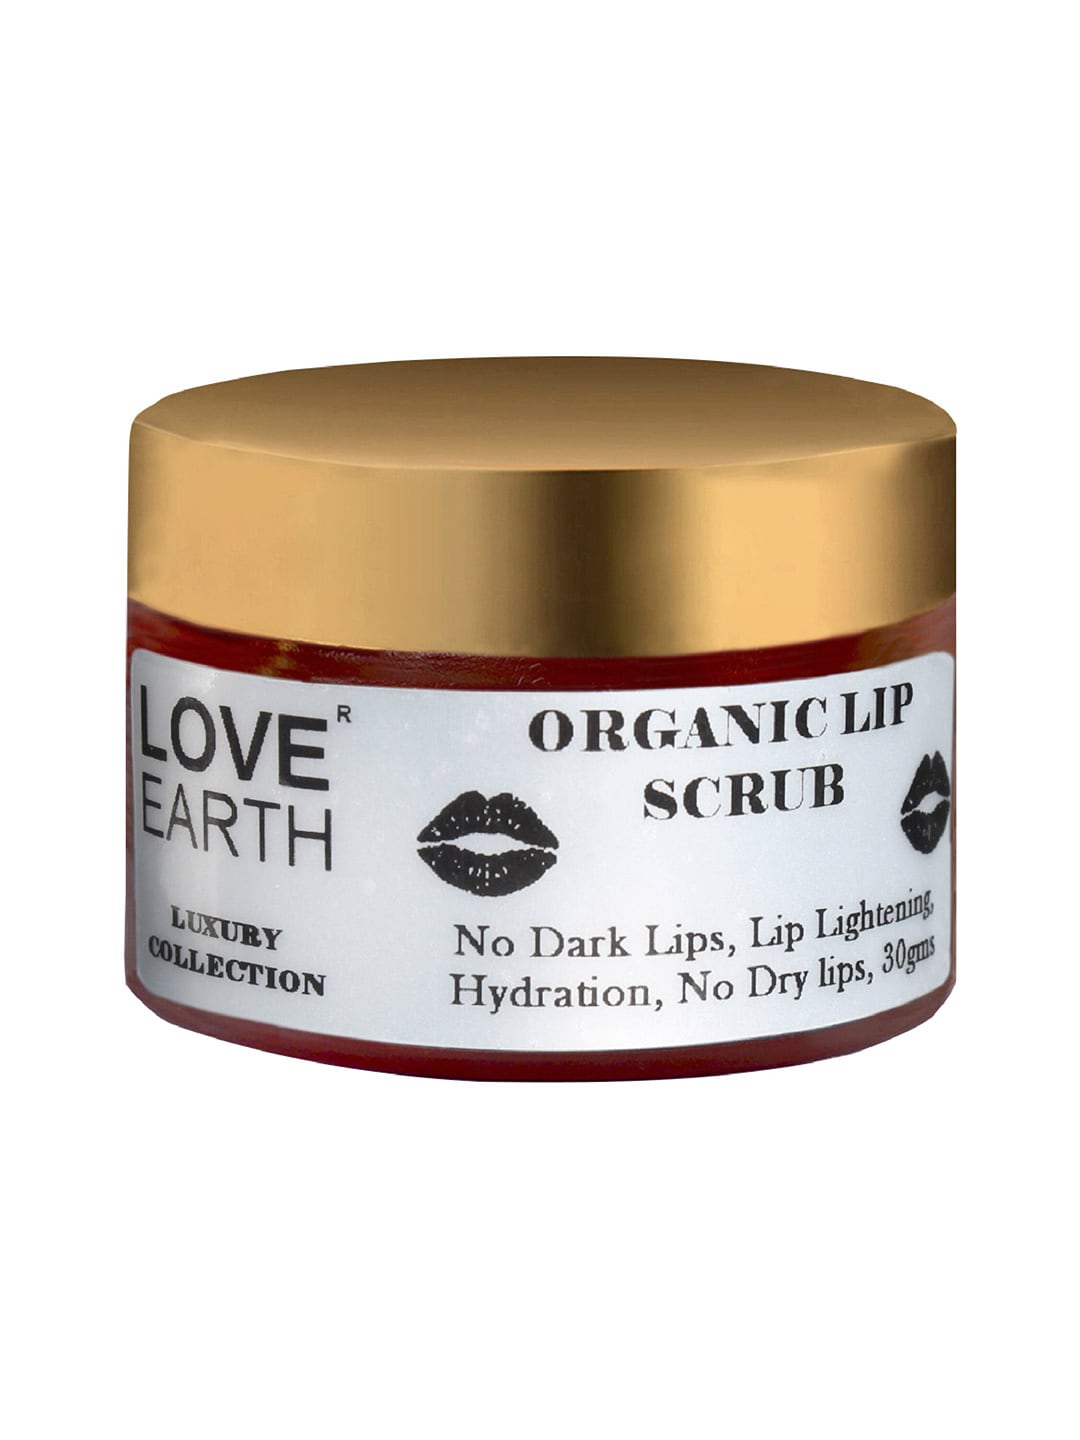 LOVE EARTH Luxury Collection Organic Lip Scrub with Cocoa Butter & Argan Oil - 30 g Price in India